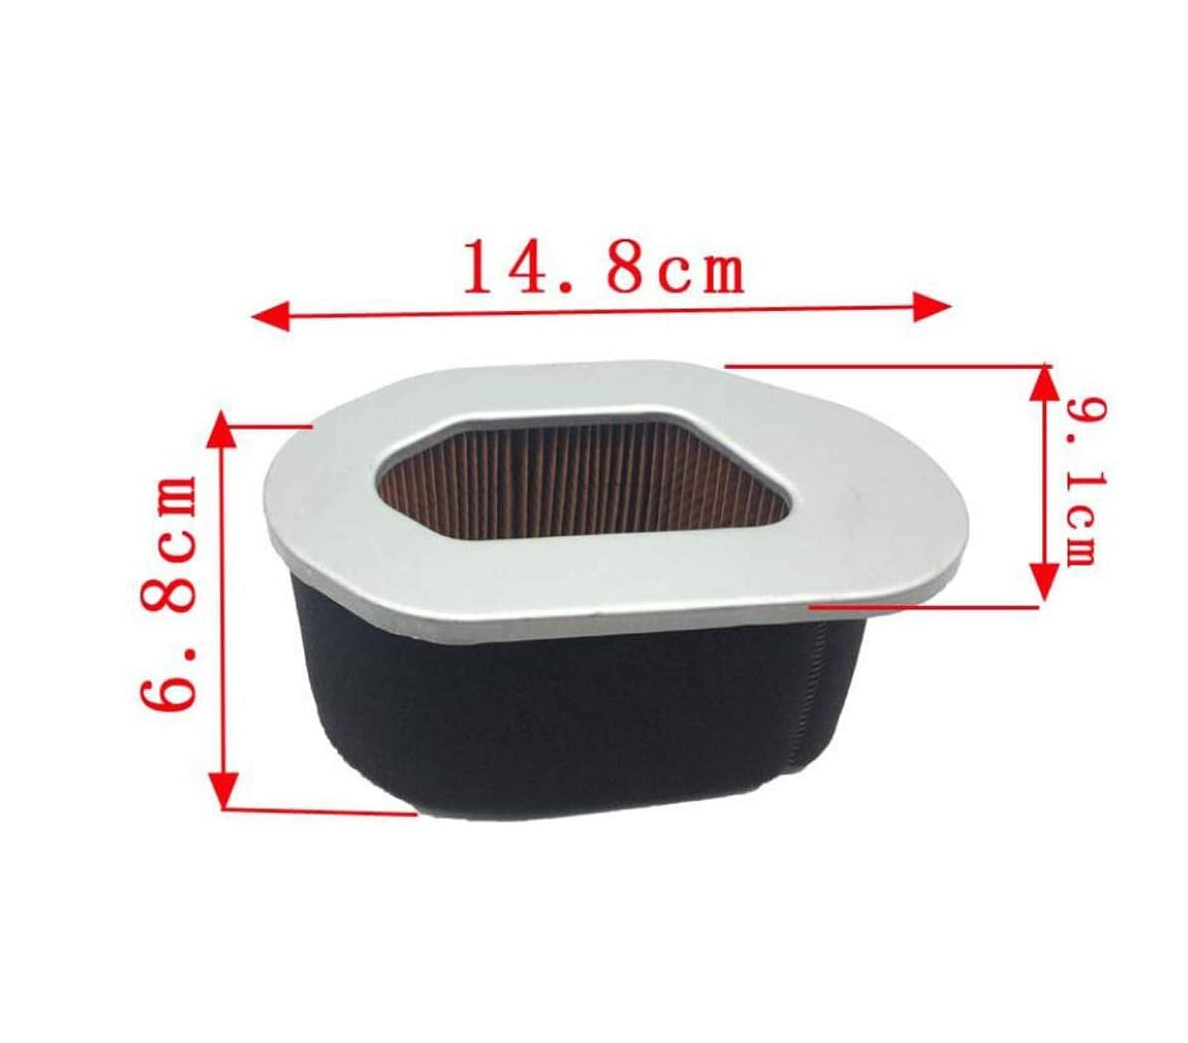 Air Filter + Pre Filter for Robin EH36 EH41 - Replaces 267-35003-11 267-32600-18 267-35003-01